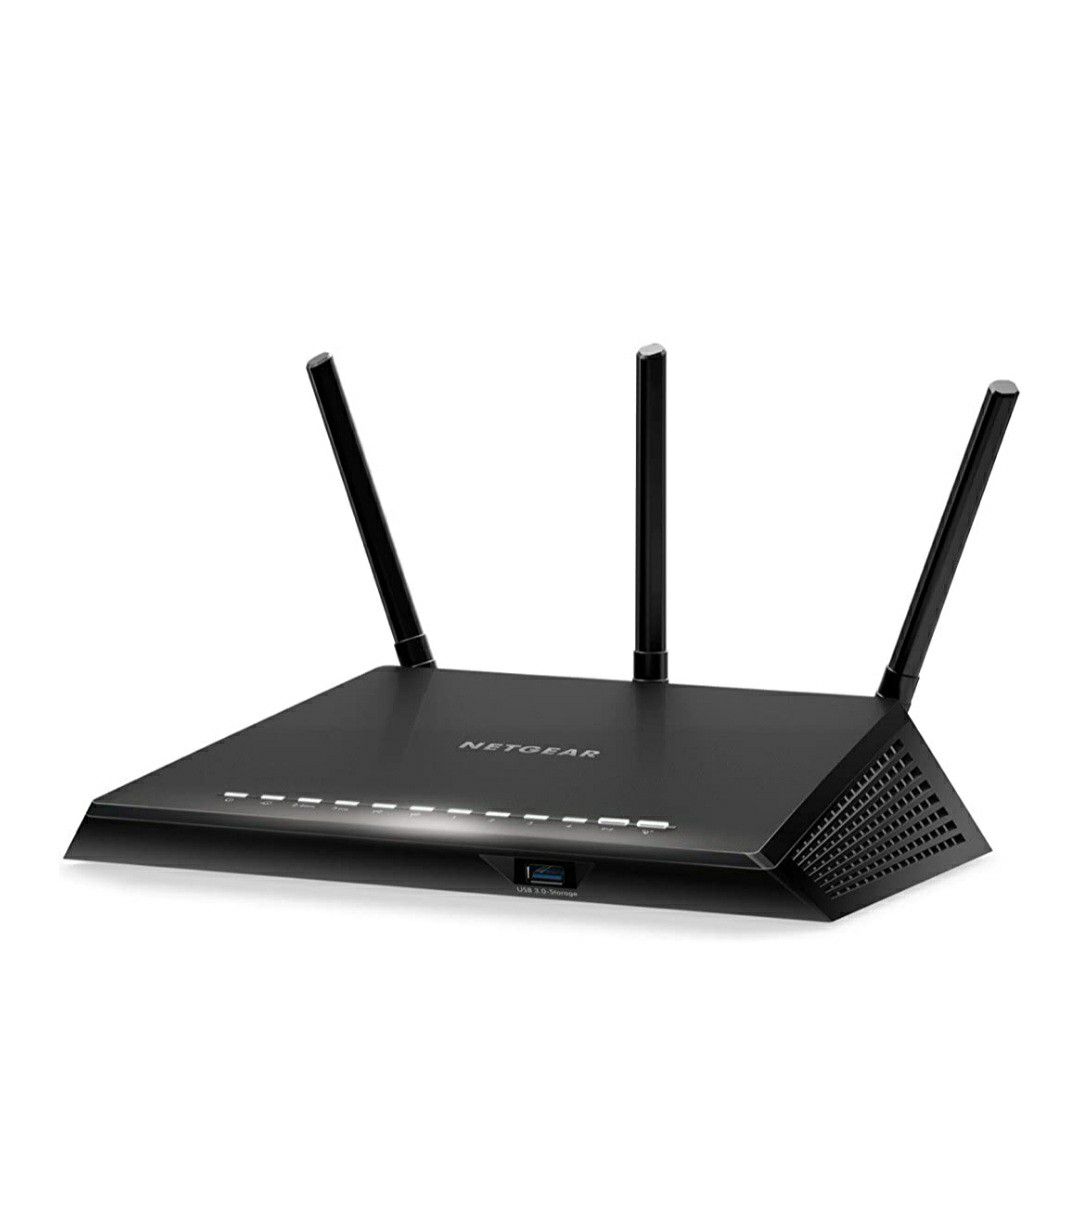 Smart WiFi Router Wireless Speed (up to 1750 Mbps) | Up to 1500 sq ft Coverage